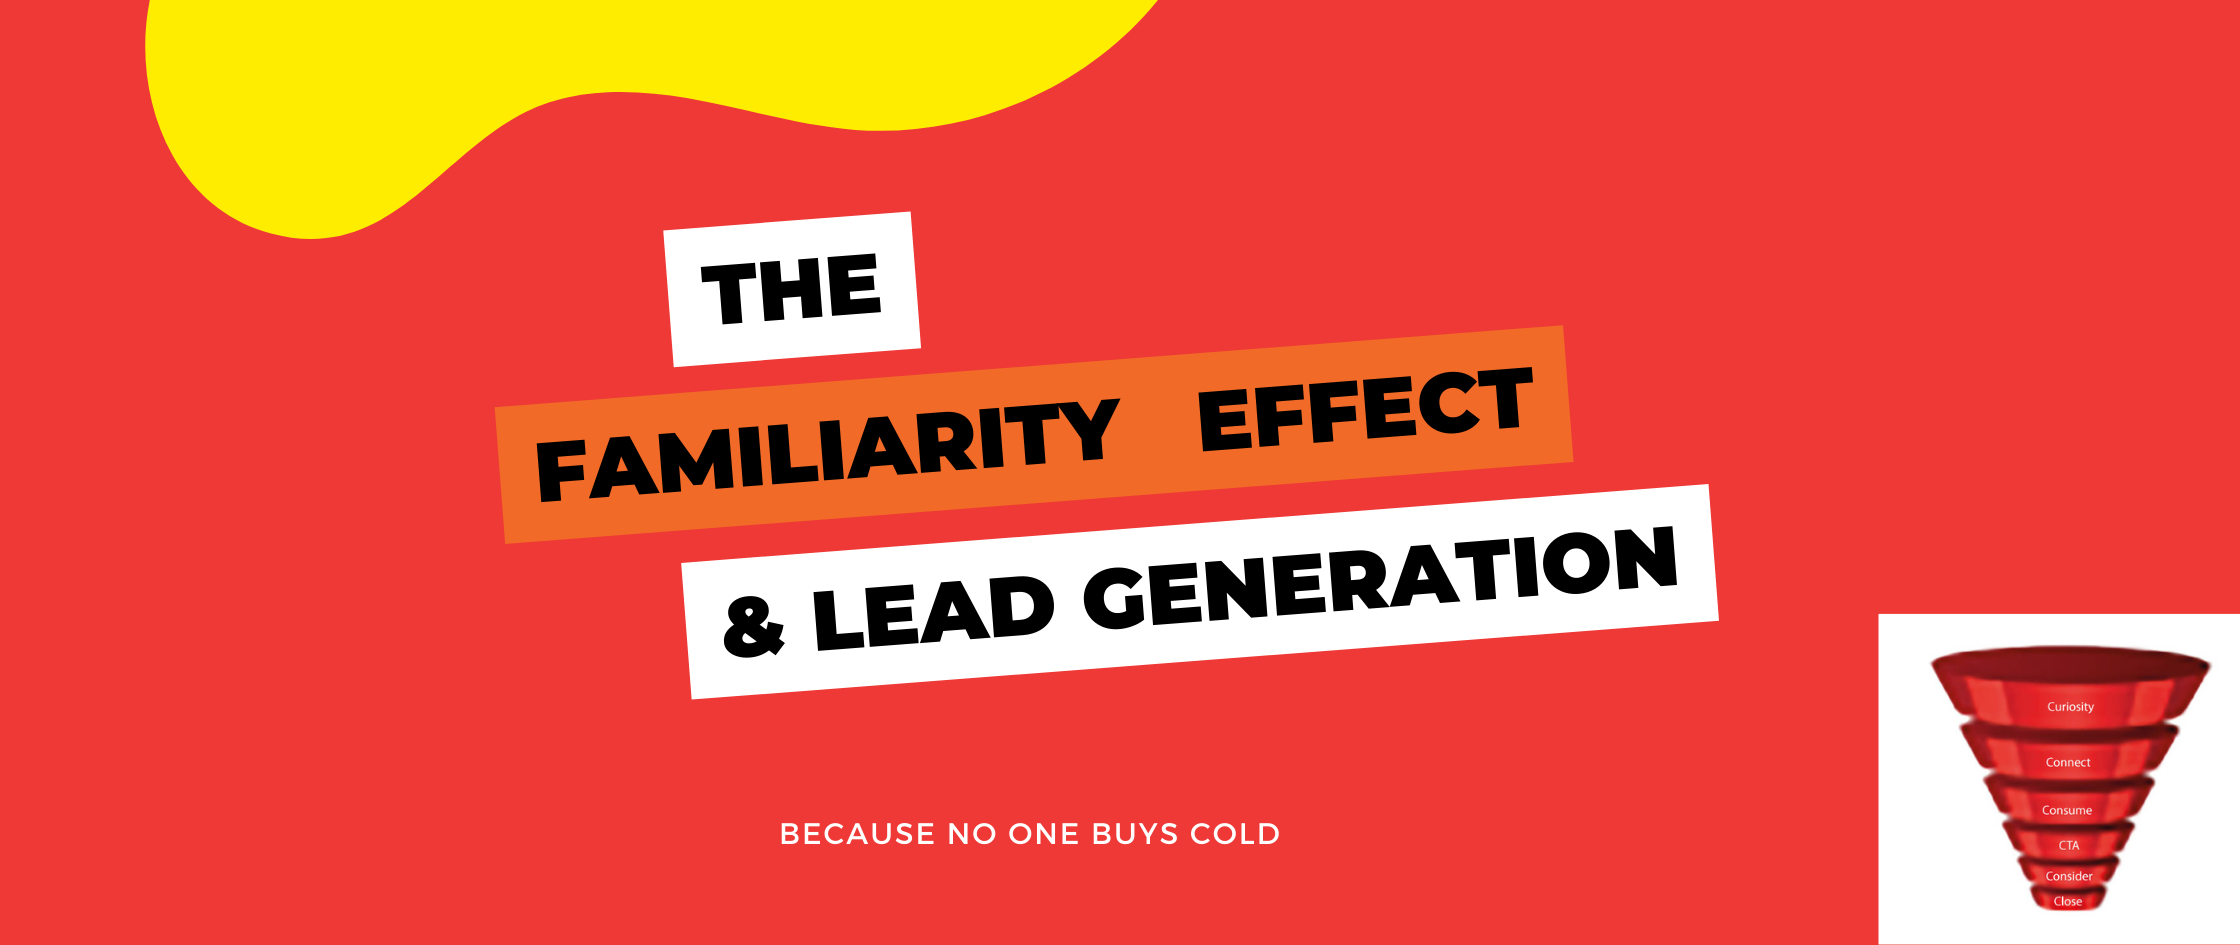 The familiarity effect and its important role in lead generation